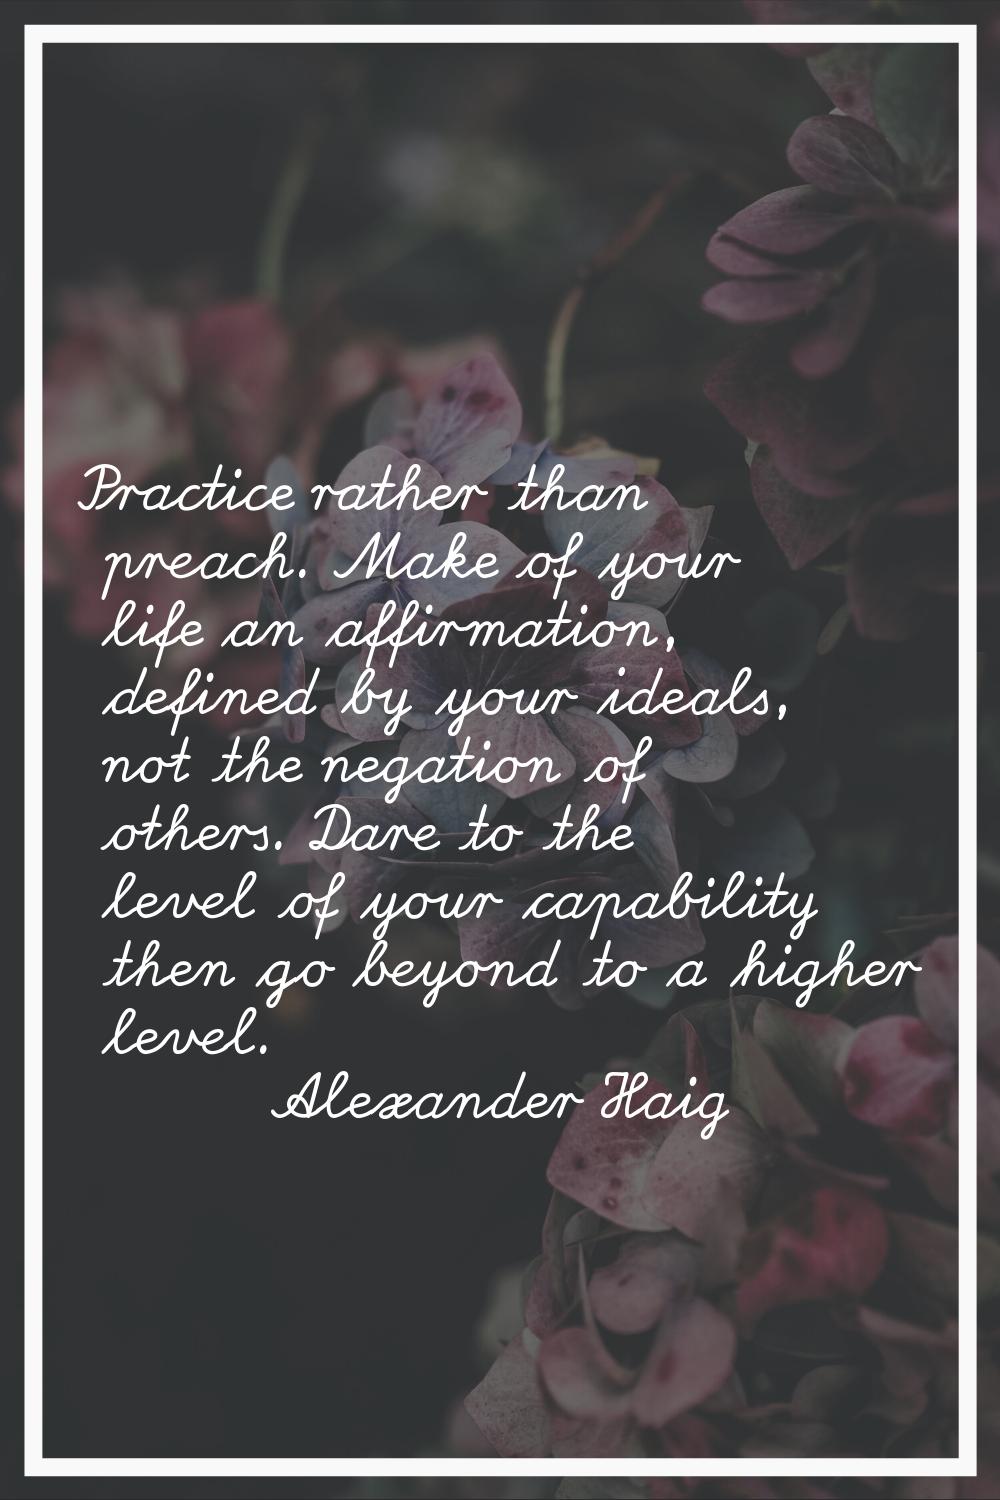 Practice rather than preach. Make of your life an affirmation, defined by your ideals, not the nega